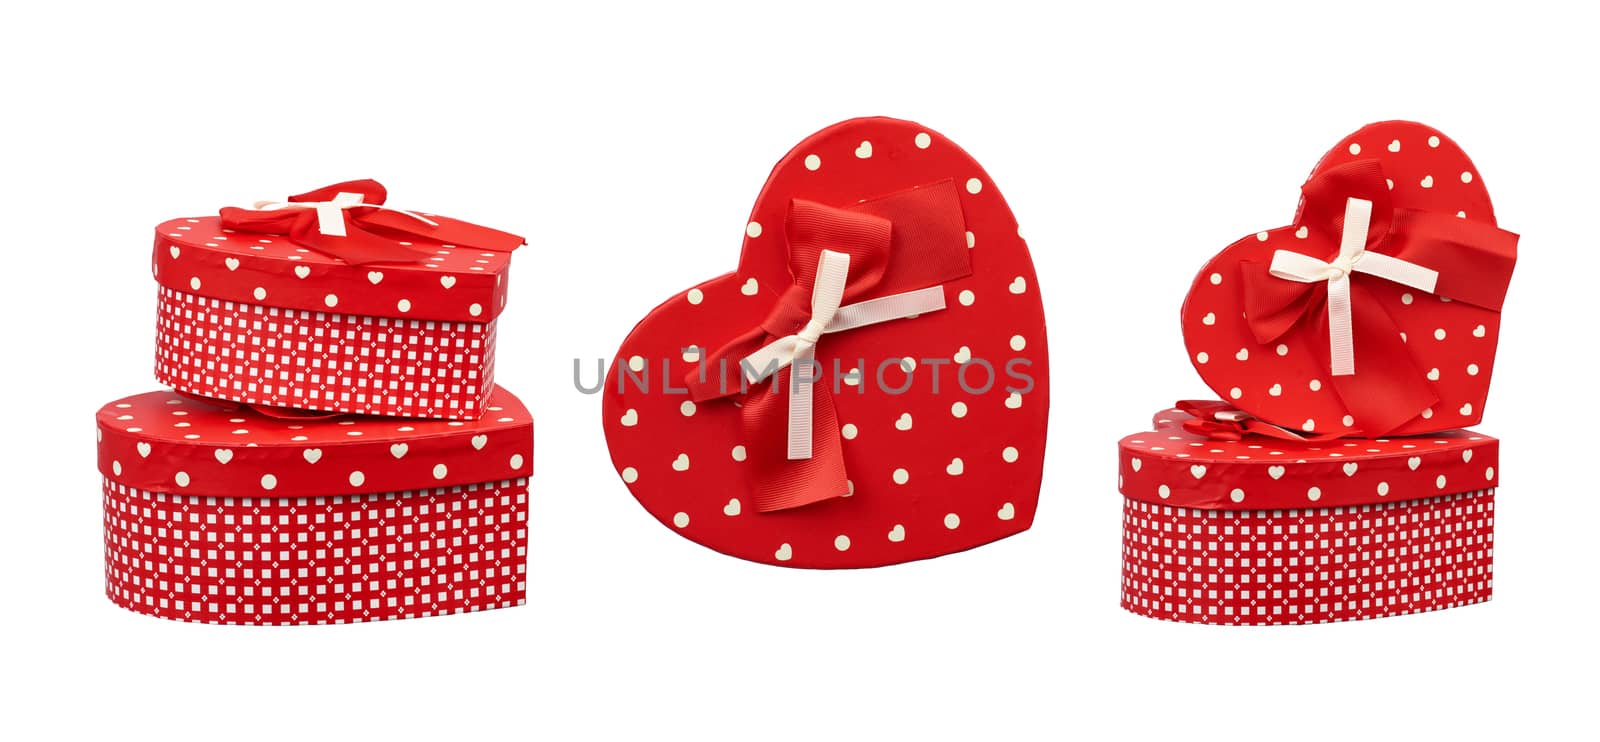 set of red heart-shaped cardboard boxes in white polka dots by ndanko